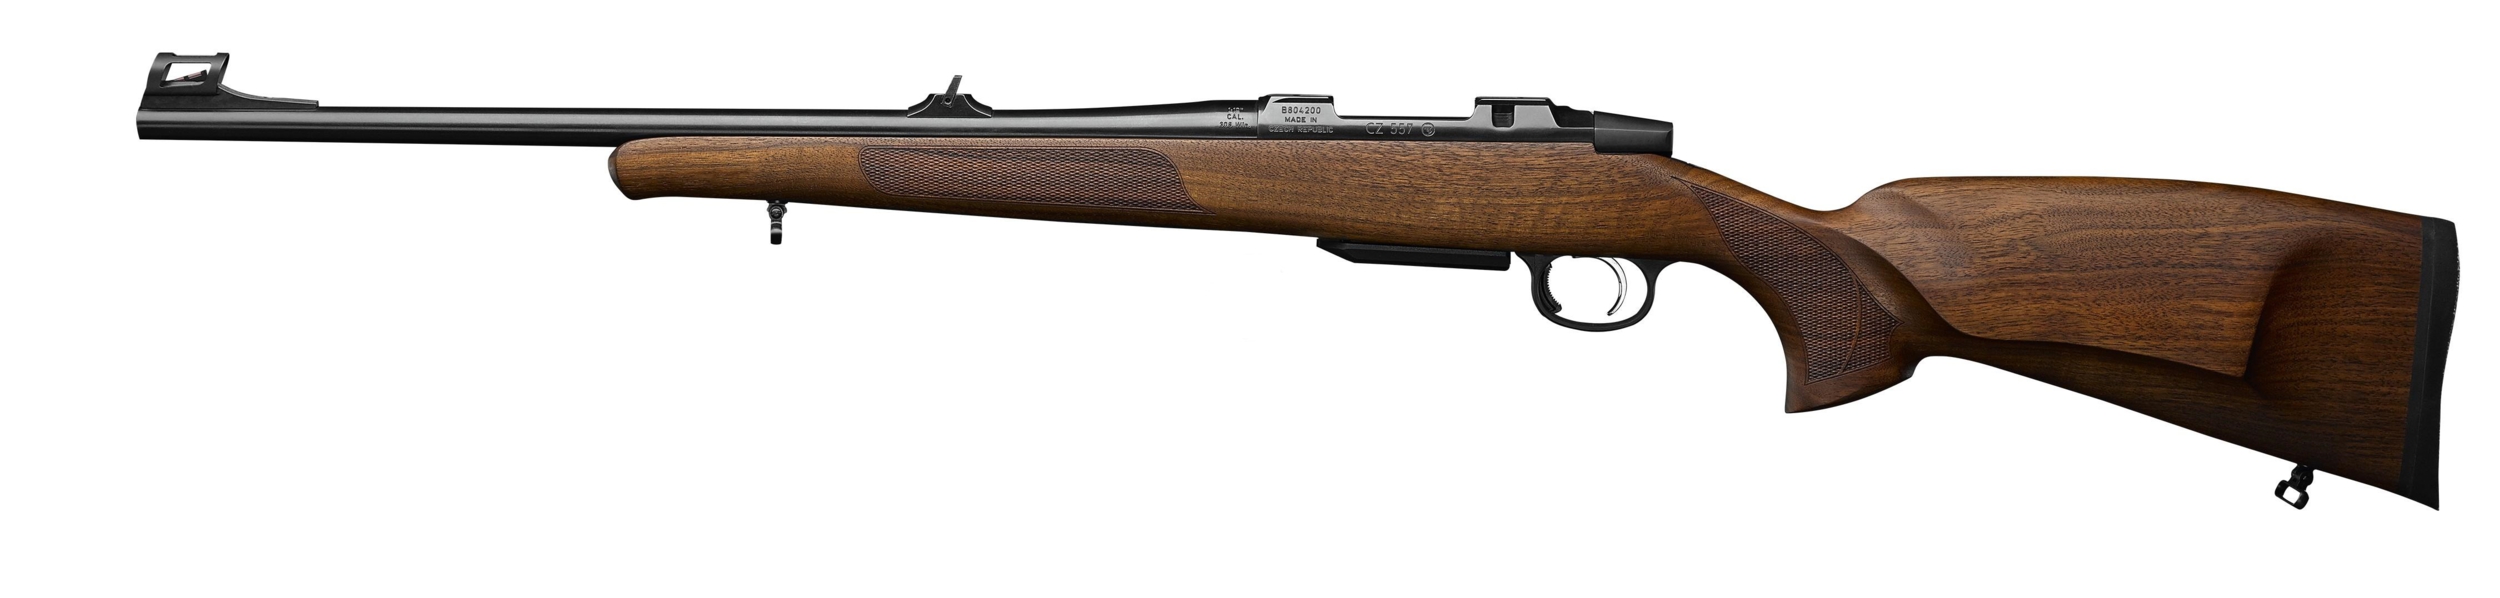 CZ 557 LUXE 4 (2)